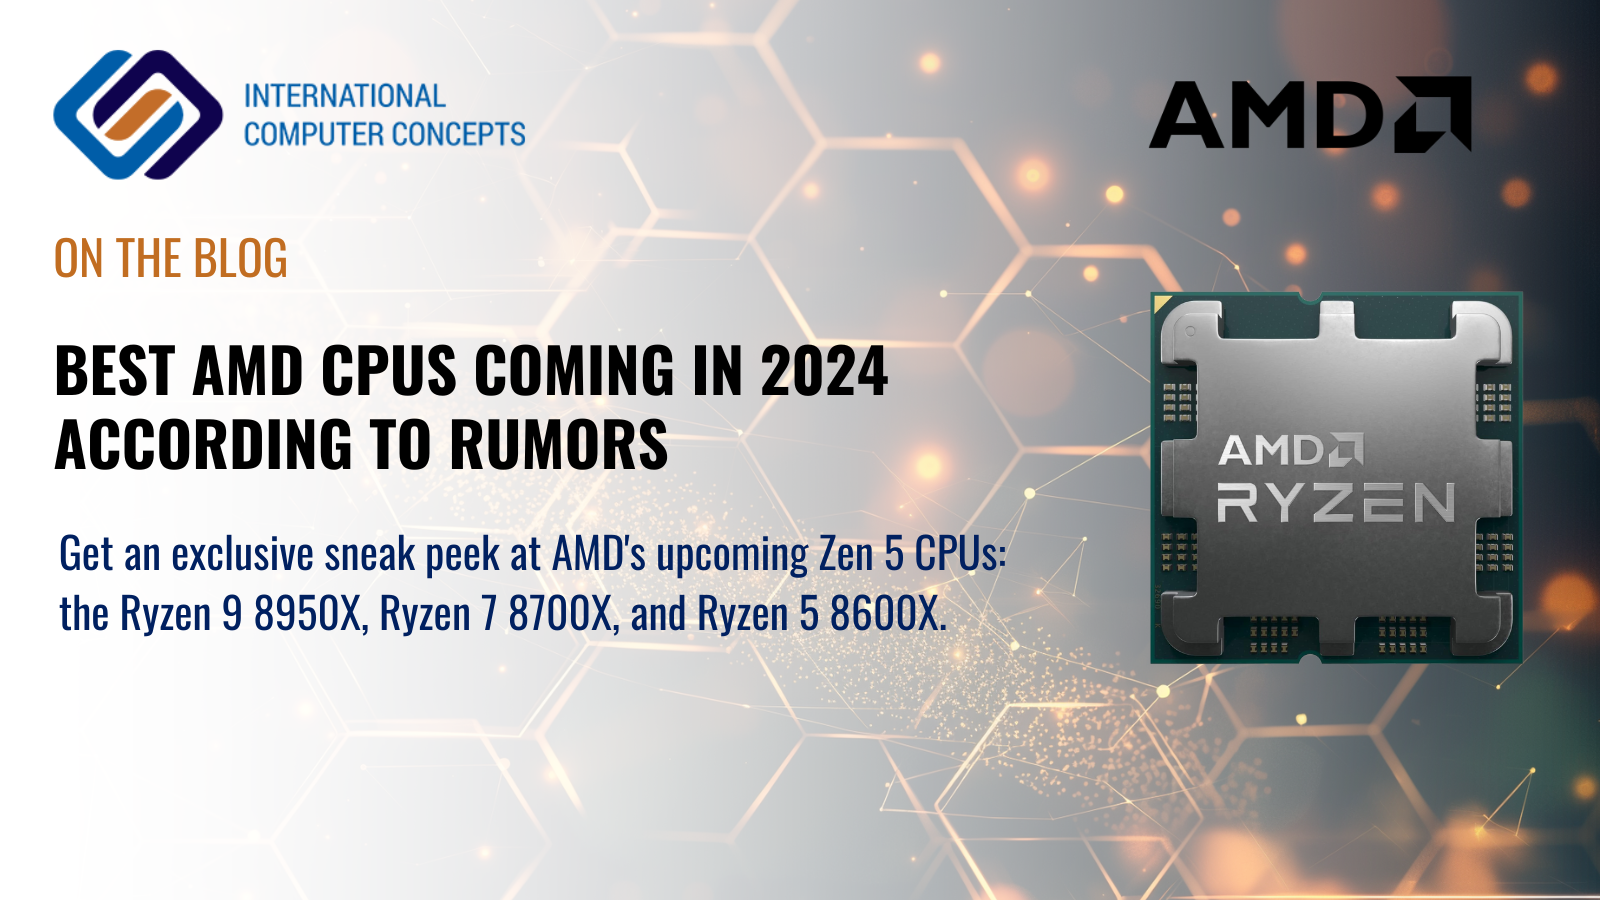 Best AMD CPUs coming in 2024 - according to rumors